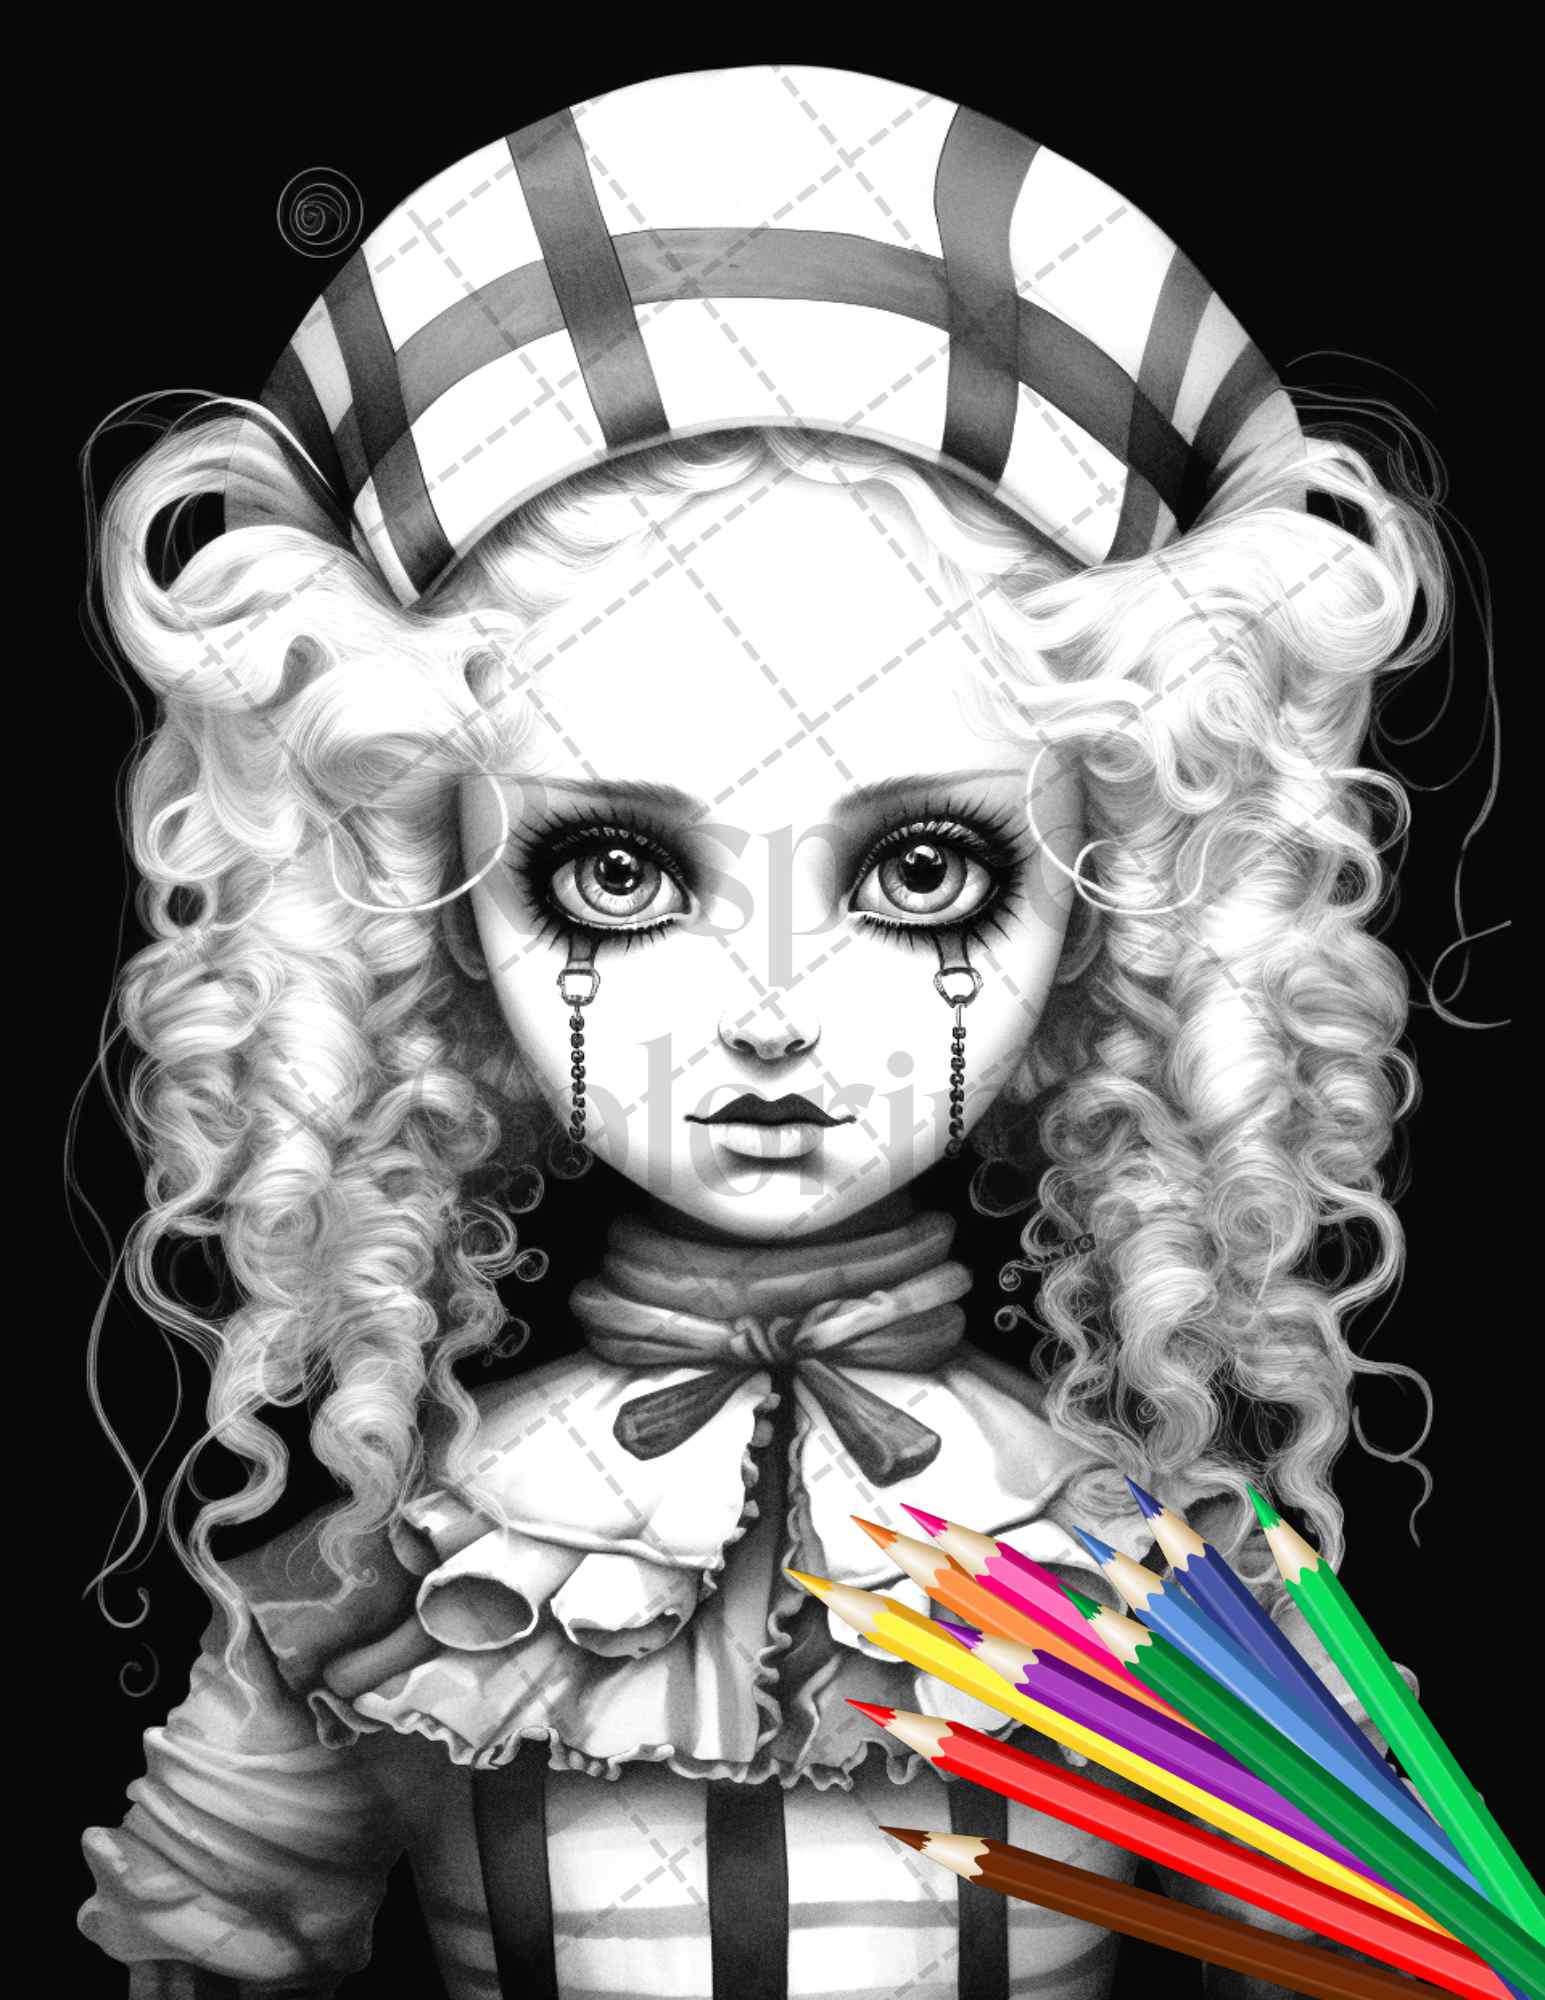 40 Creepy Porcelain Dolls Grayscale Coloring Pages for Adults, PDF File Instant Download - raspiee